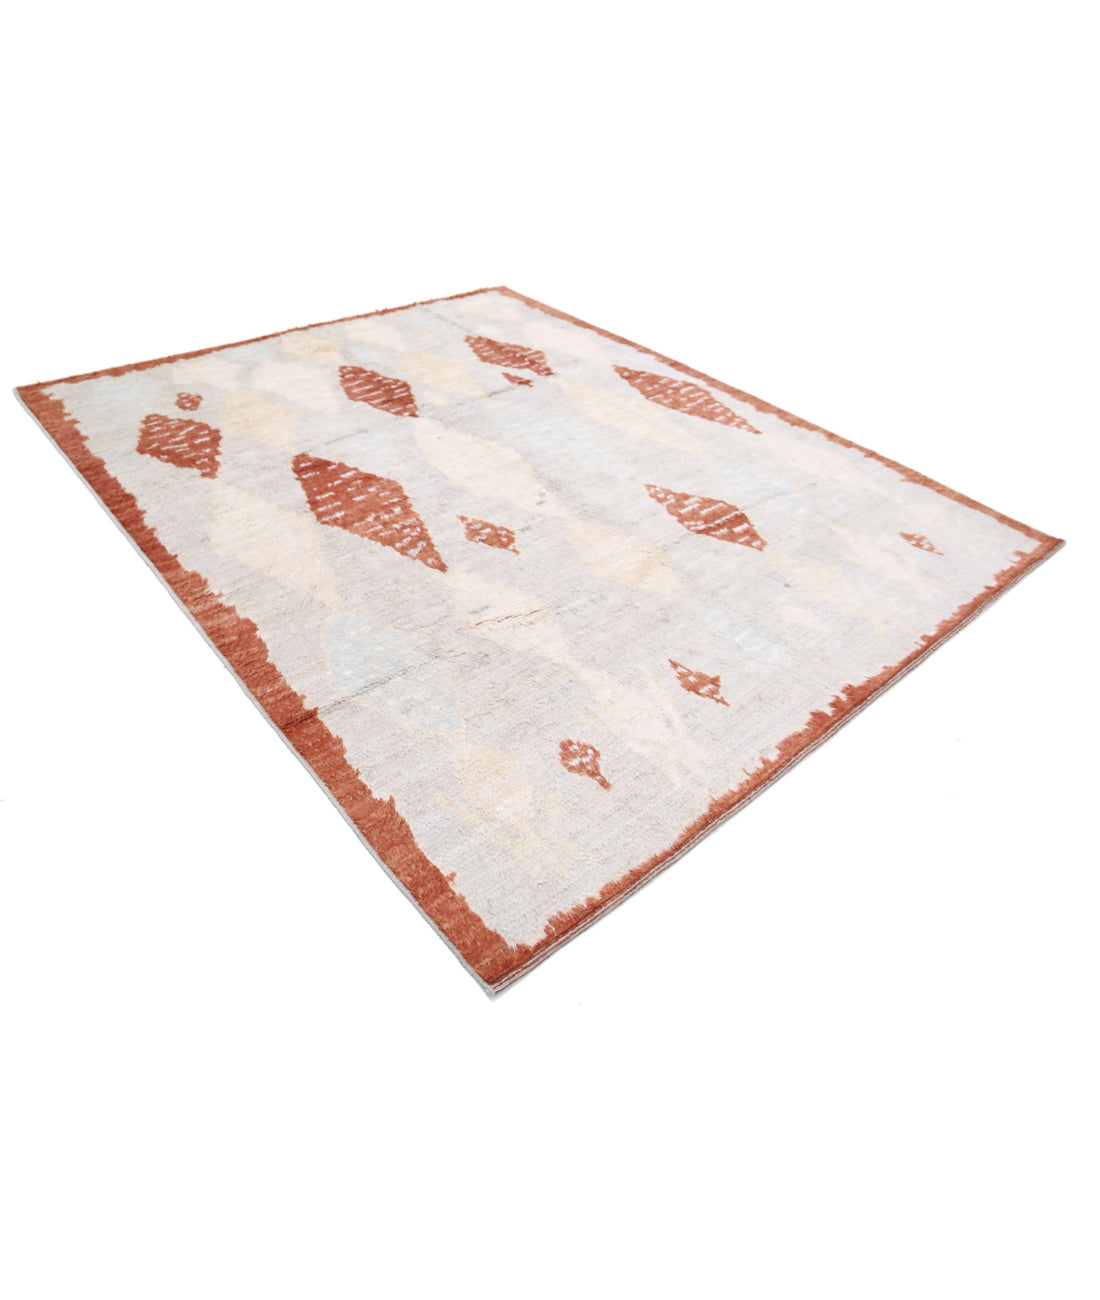 Hand Knotted Tribal Moroccan Wool Rug - 8'2'' x 10'0'' 8'2'' x 10'0'' (245 X 300) / Grey / Rust